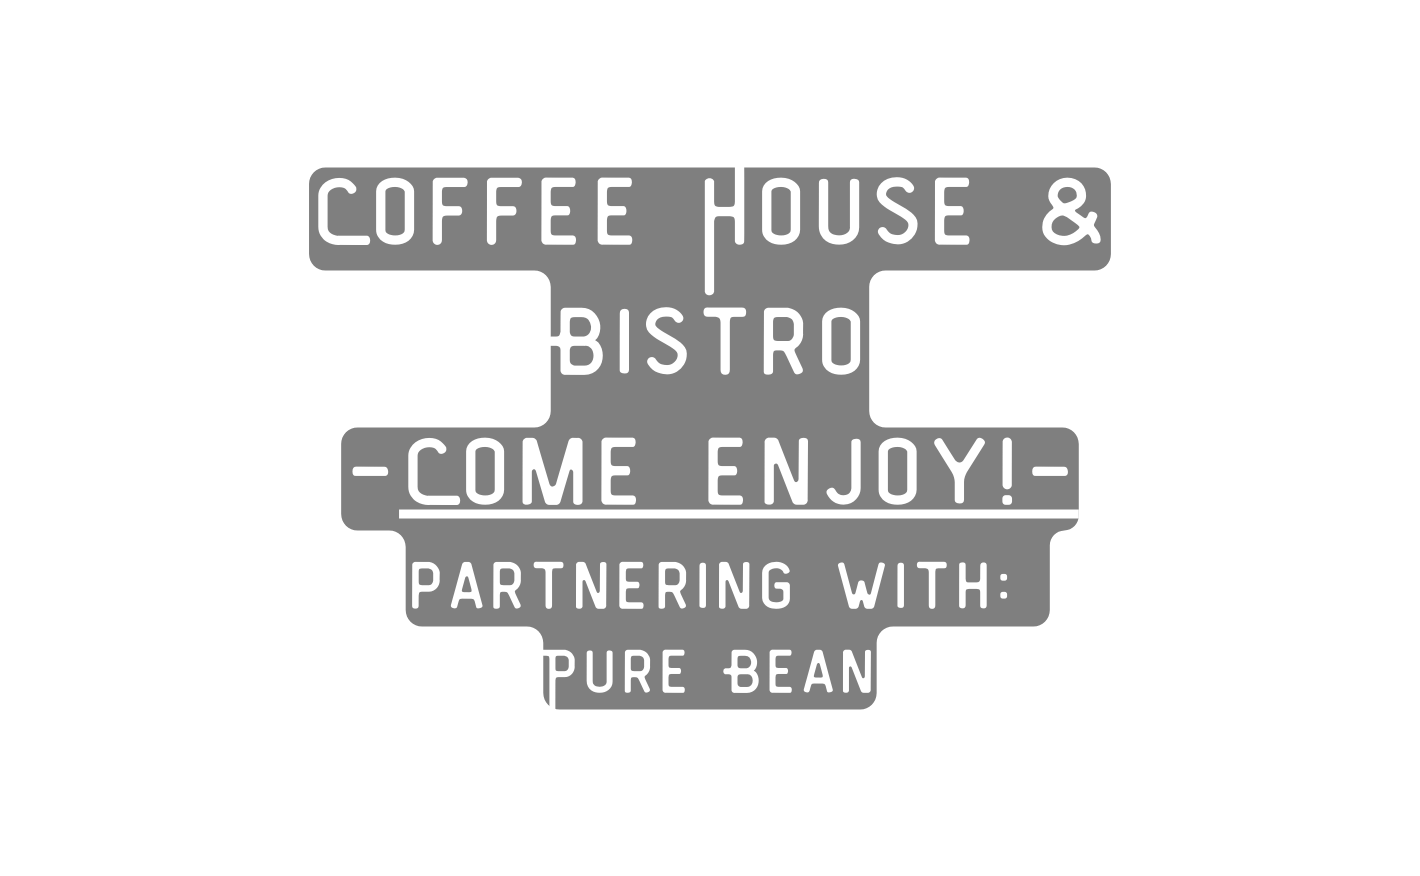 Coffee House Bistro Come enjoy partnering with Pure Bean